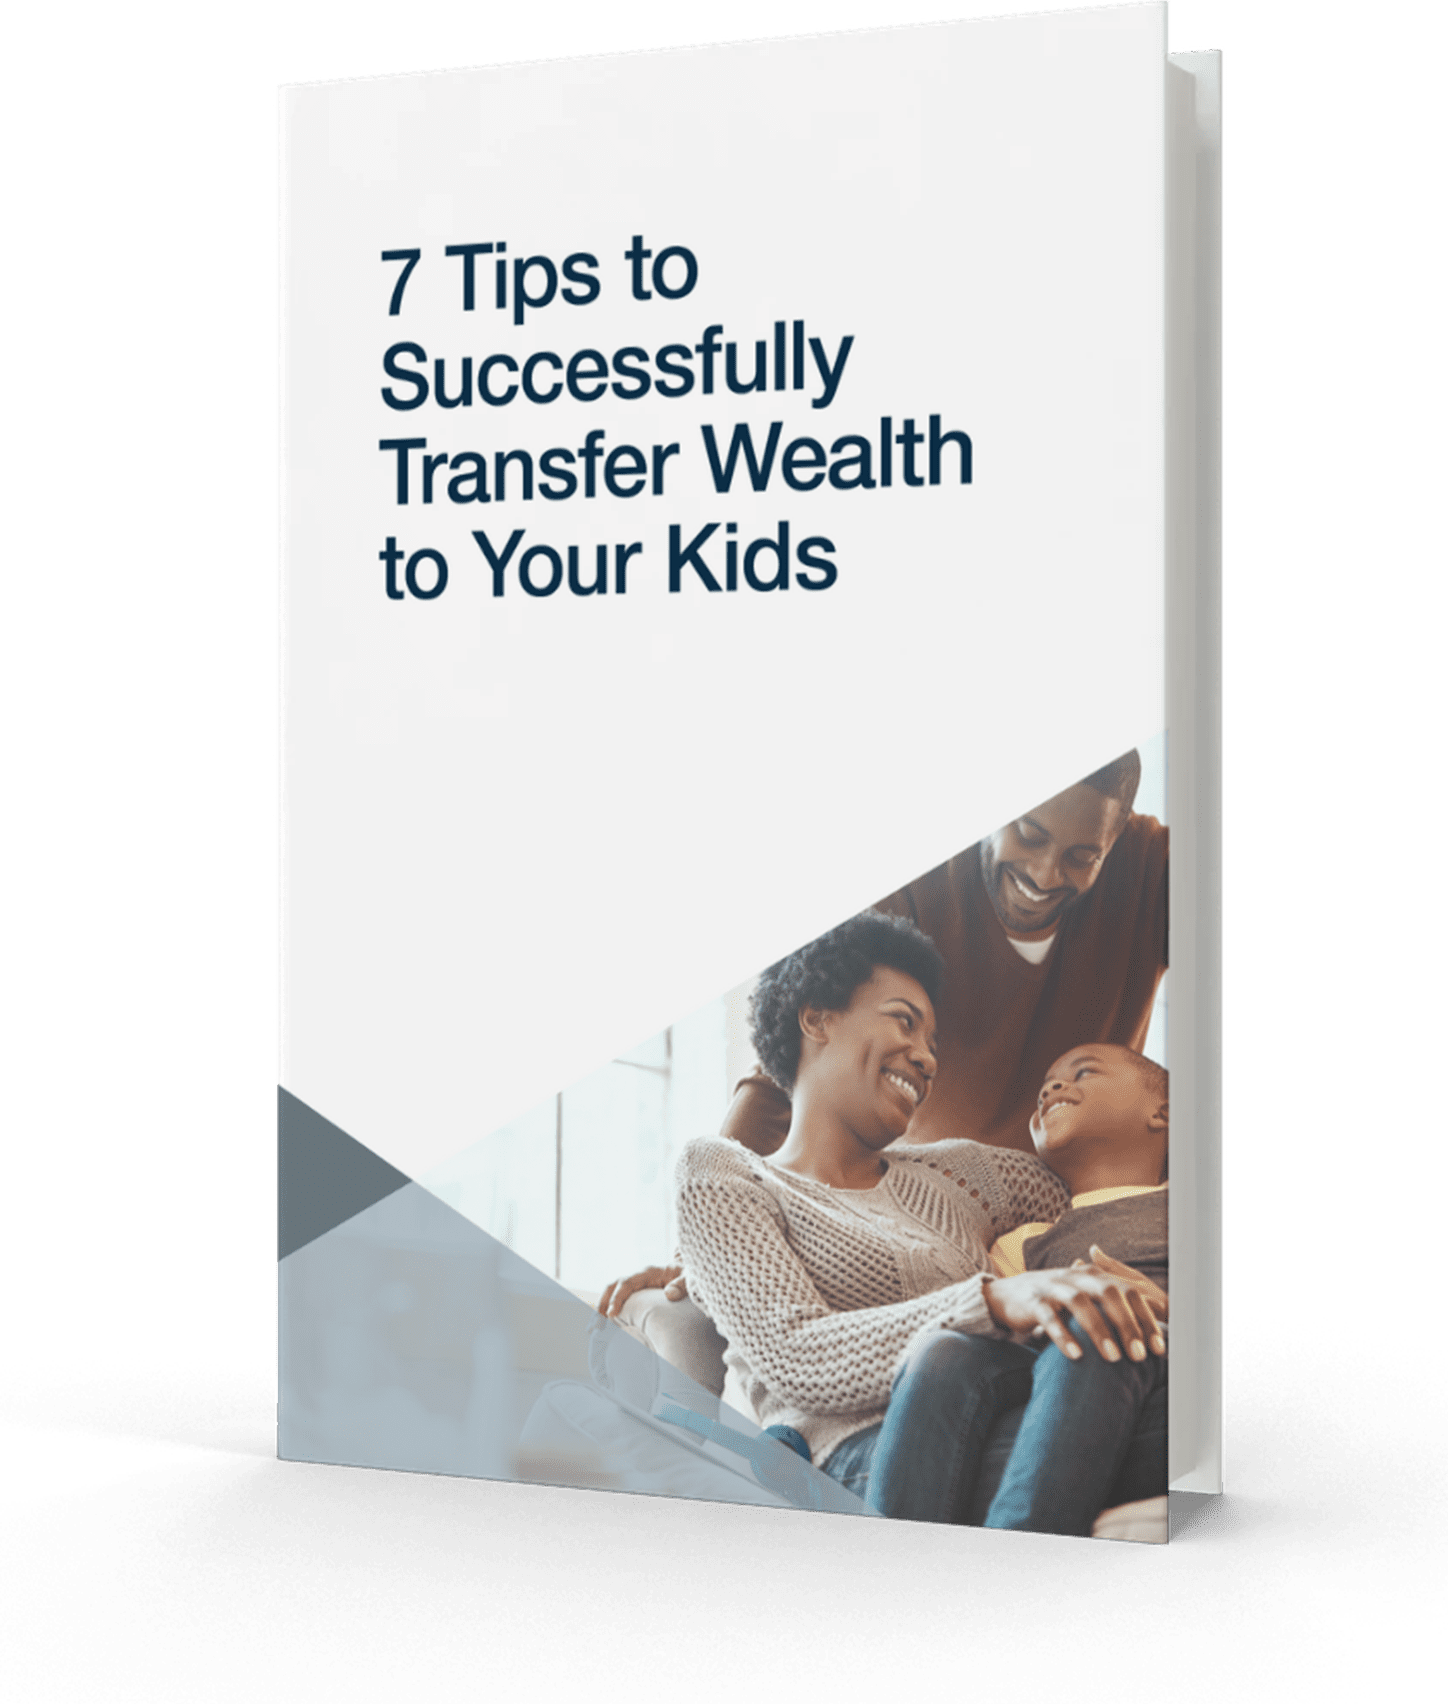 7 Tips to Successfully Transfer Wealth to Your Kids